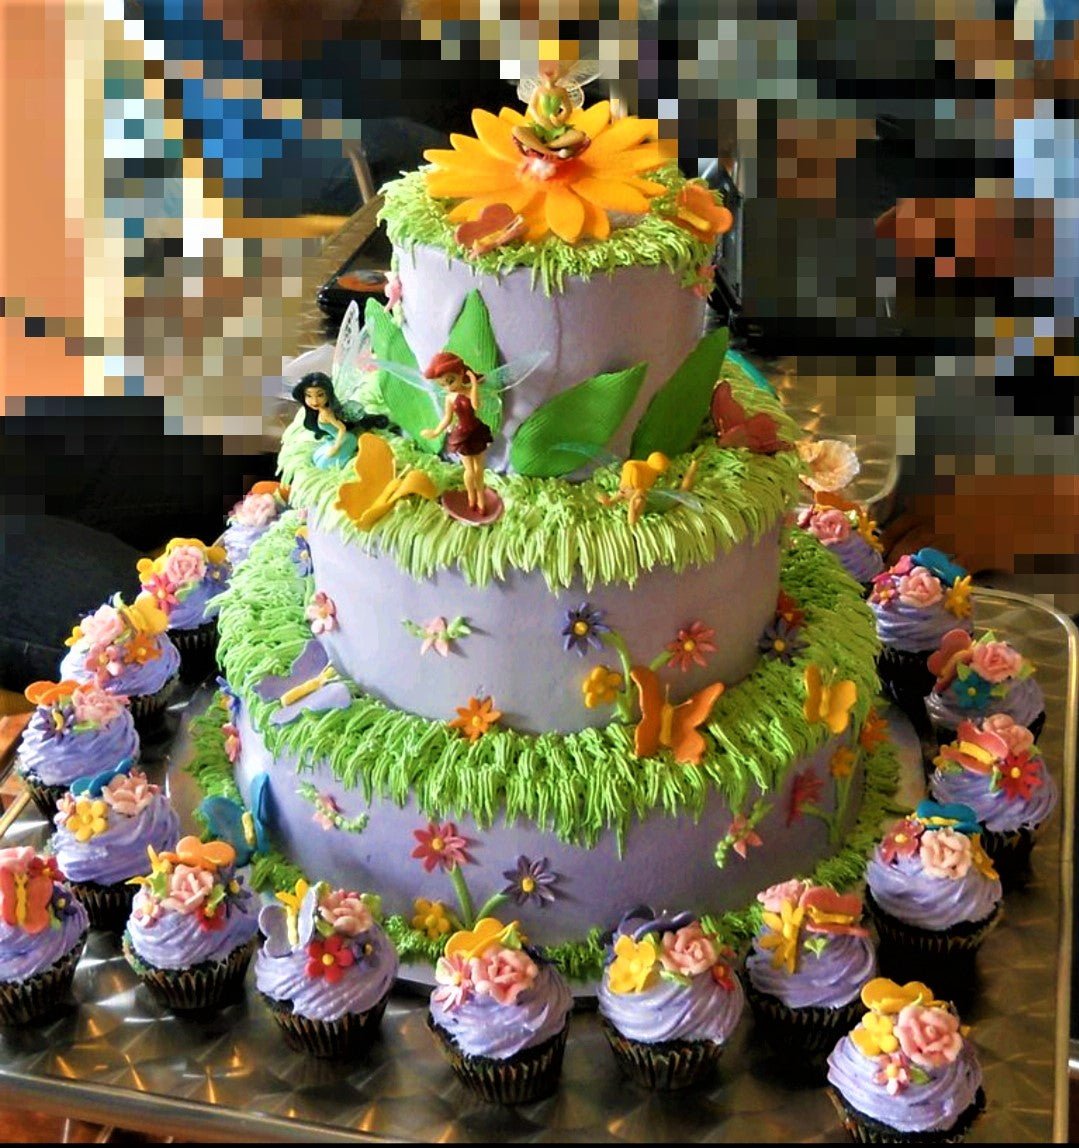 Fairy Cakes: What Are They, Anyway? | HuffPost Life